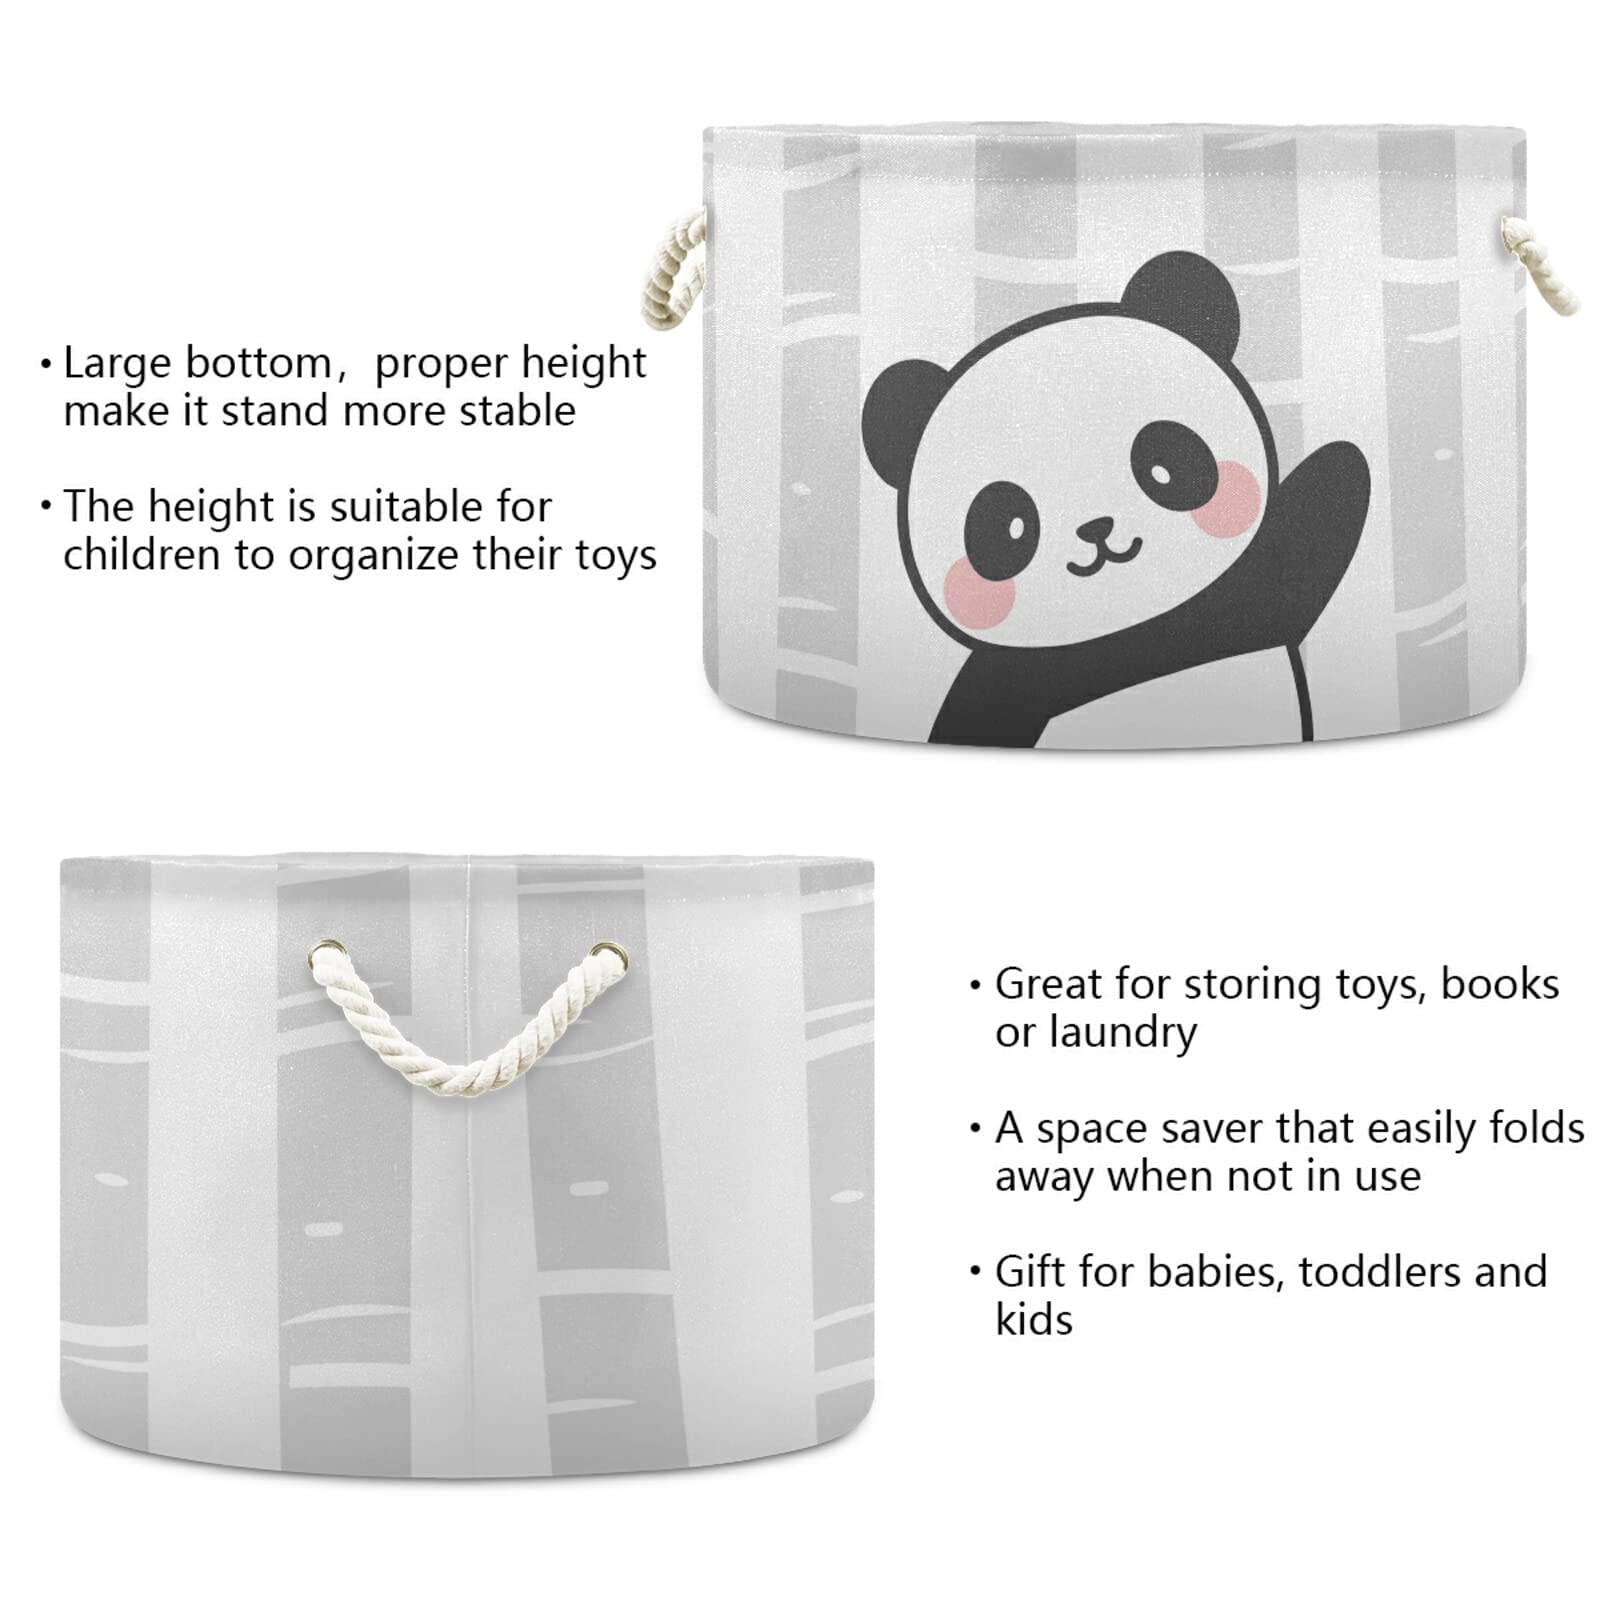 ALAZA Hello Panda Baby Shower Cute Animal Storage Basket Gift Baskets Large Collapsible Laundry Hamper with Handle, 20x20x14 in